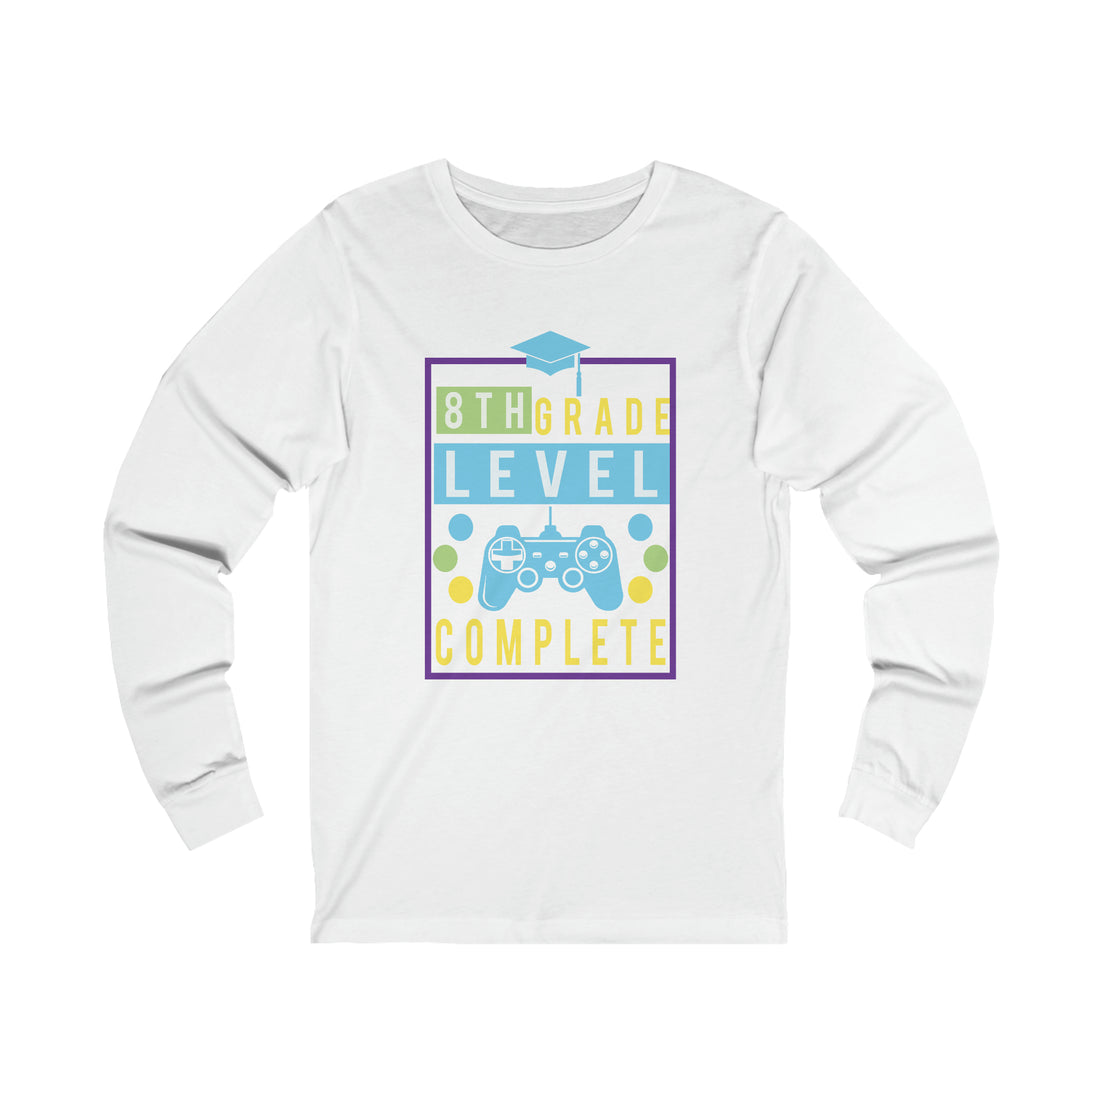 8th Grade Level Complete - Unisex Jersey Long Sleeve Tee